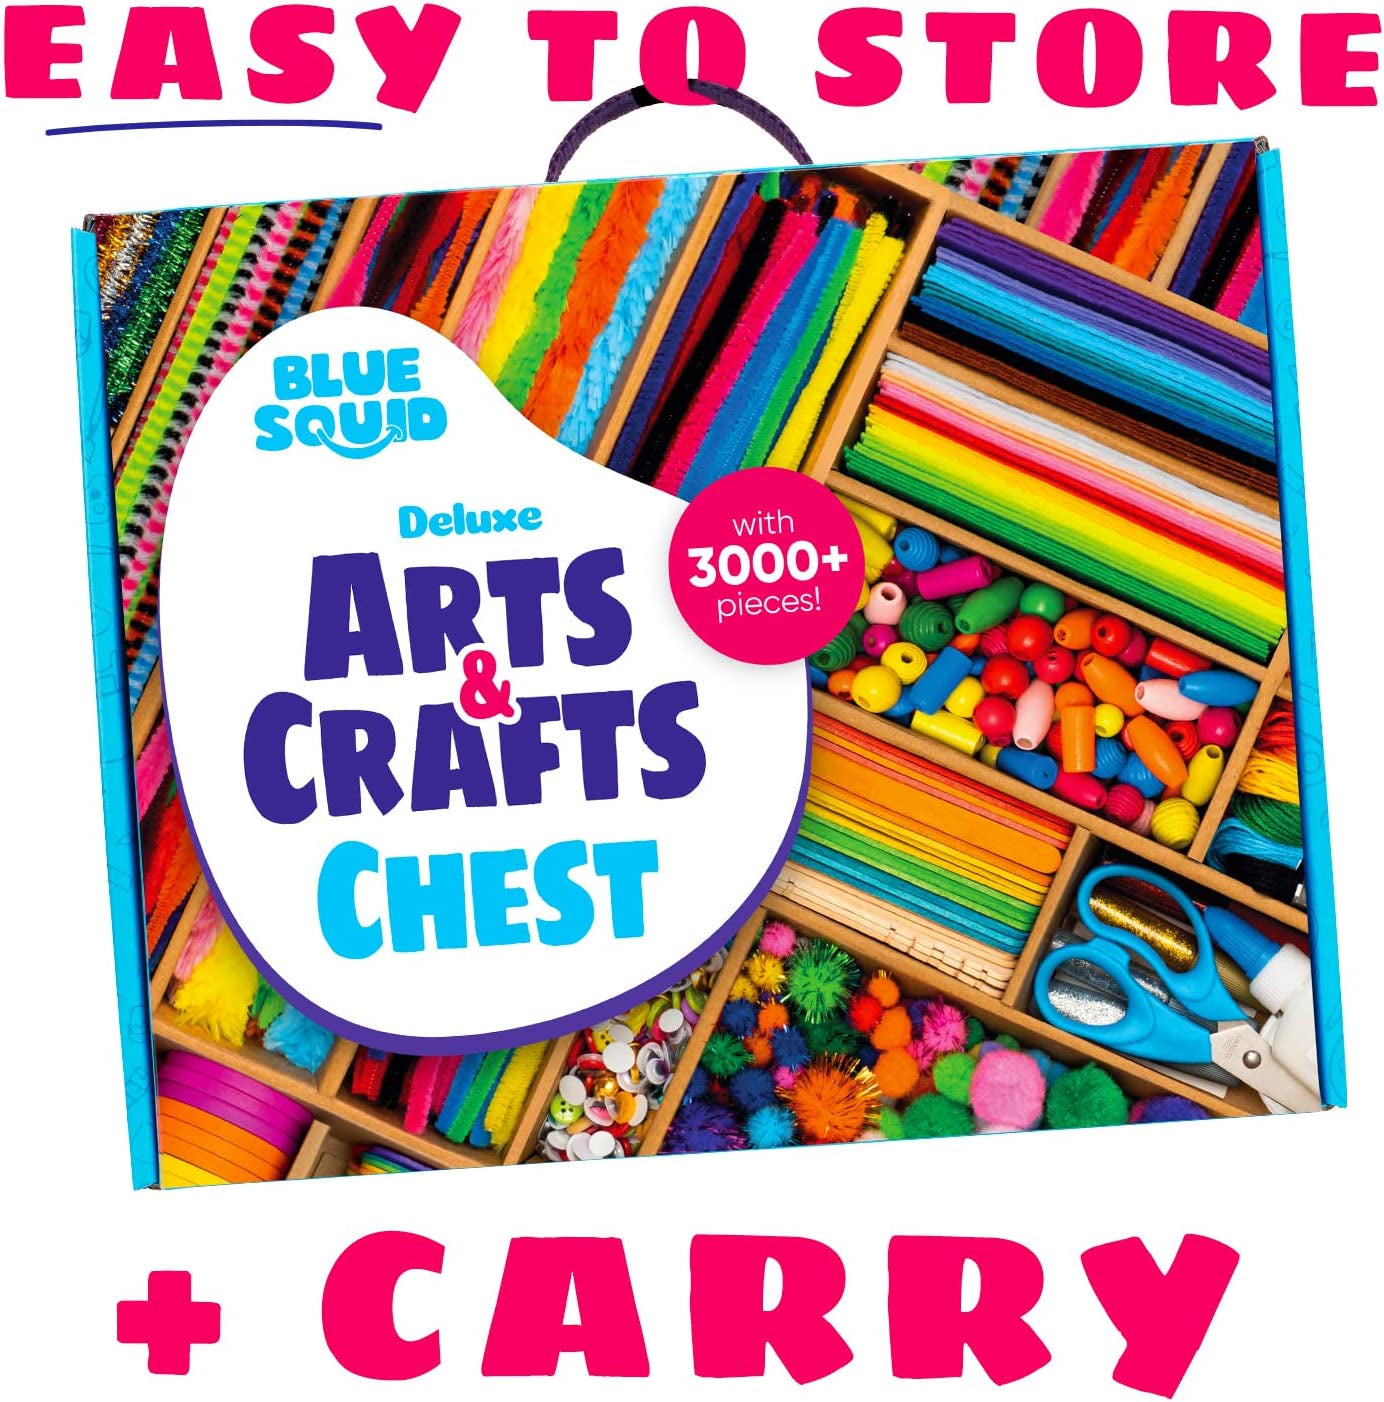 Craft Supplies for Kids - 3000+Pcs in the Ultimate Arts and Crafts Box - This Deluxe Art Supply Kit & Craft Set Is Perfect for Young Artists of Ages 4,5,6,7,8,9,10,11,12